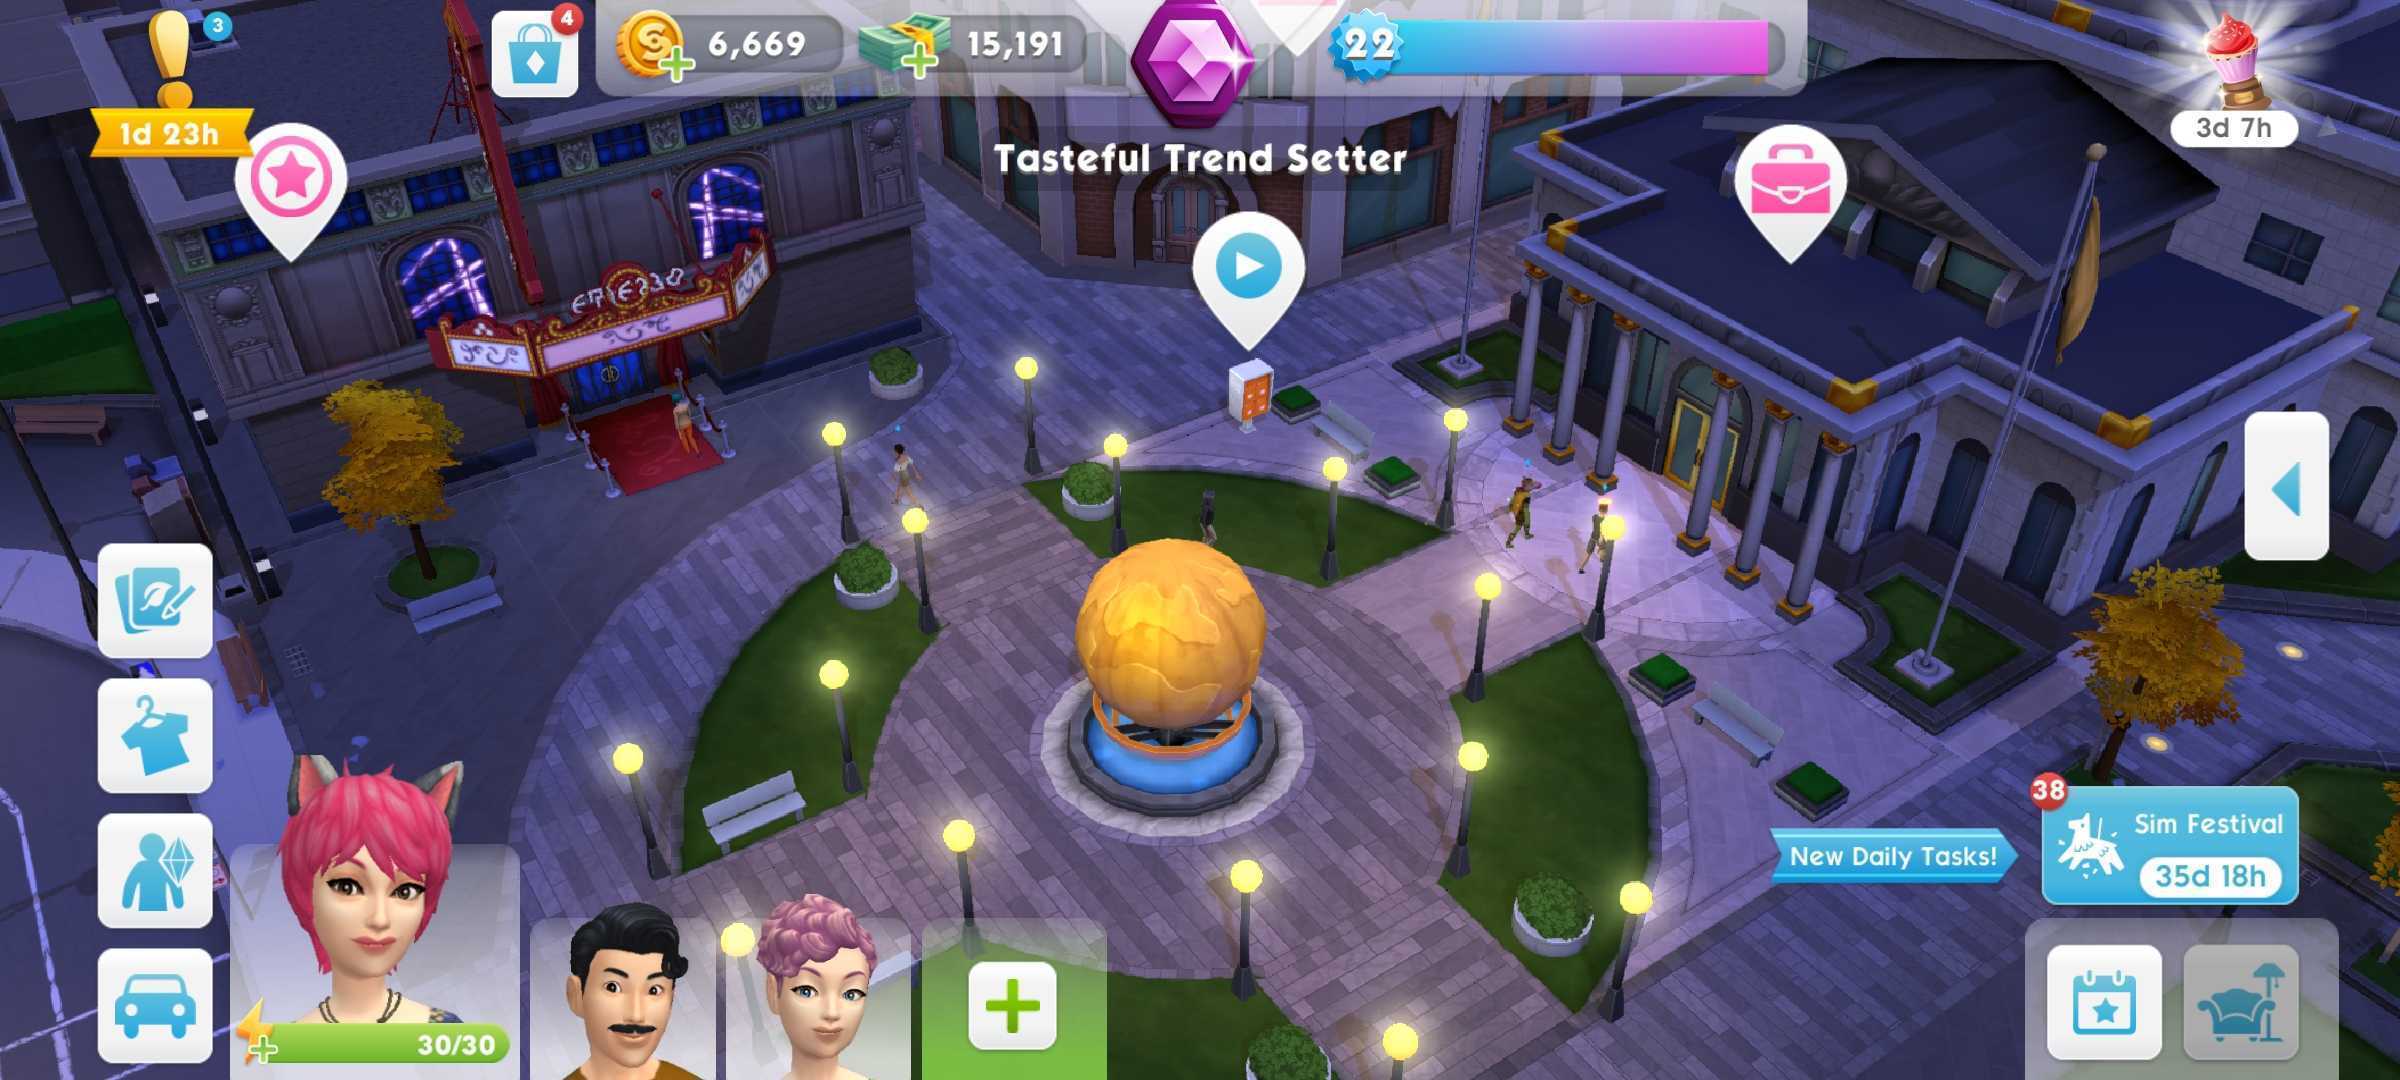 Play 'The Sims Mobile' on Your iPhone or Android Right Now